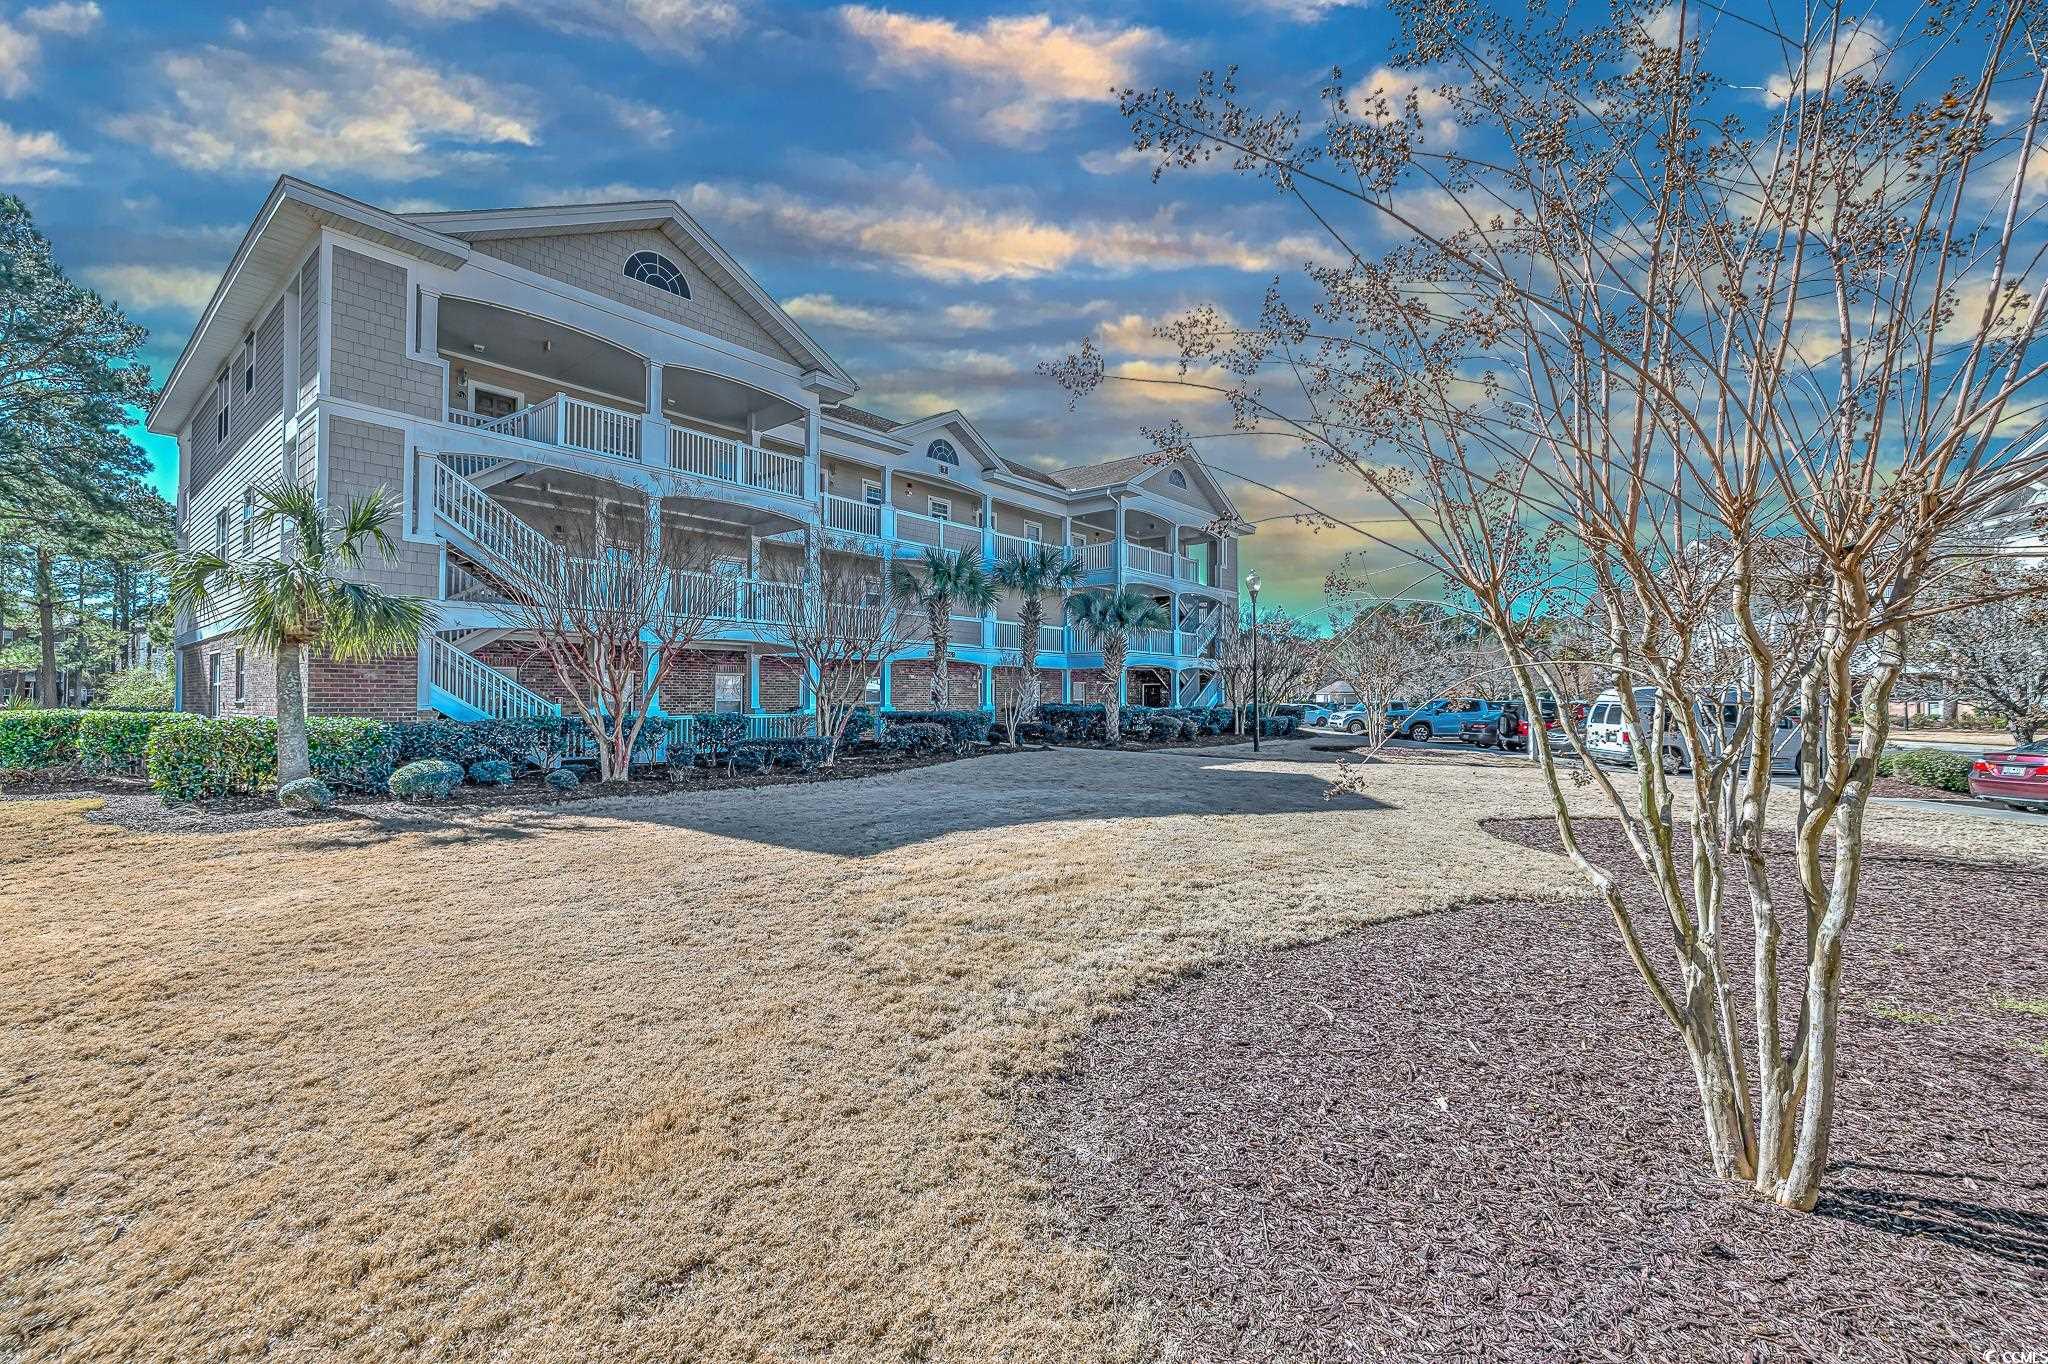 fully furnished, vaulted ceilings, corner villa, lake views, golf course views - - - don't miss this exceptional chance to become the proud owner of a coveted corner unit, boasting stunning panoramic vistas! situated within the secure confines of the river crossing community at barefoot resort, this home offers a unique blend of privacy and luxury. residents have exclusive access to the river crossing's private pool, and the broader barefoot resort community, sprawling over 2,300 acres, presents an array of unparalleled amenities. immerse yourself in the lavishness of a colossal saltwater pool, spanning nearly 15,000 square feet, with breathtaking views of the intracoastal waterway. enjoy the convenience of a private beachfront cabana, complete with complimentary seasonal shuttle service, ensuring a seamless beach experience. the community also features several high-end clubhouses, four spectacular golf courses, and an extensive network of trails perfect for walking, jogging, or biking, offering an active and luxurious lifestyle like no other.